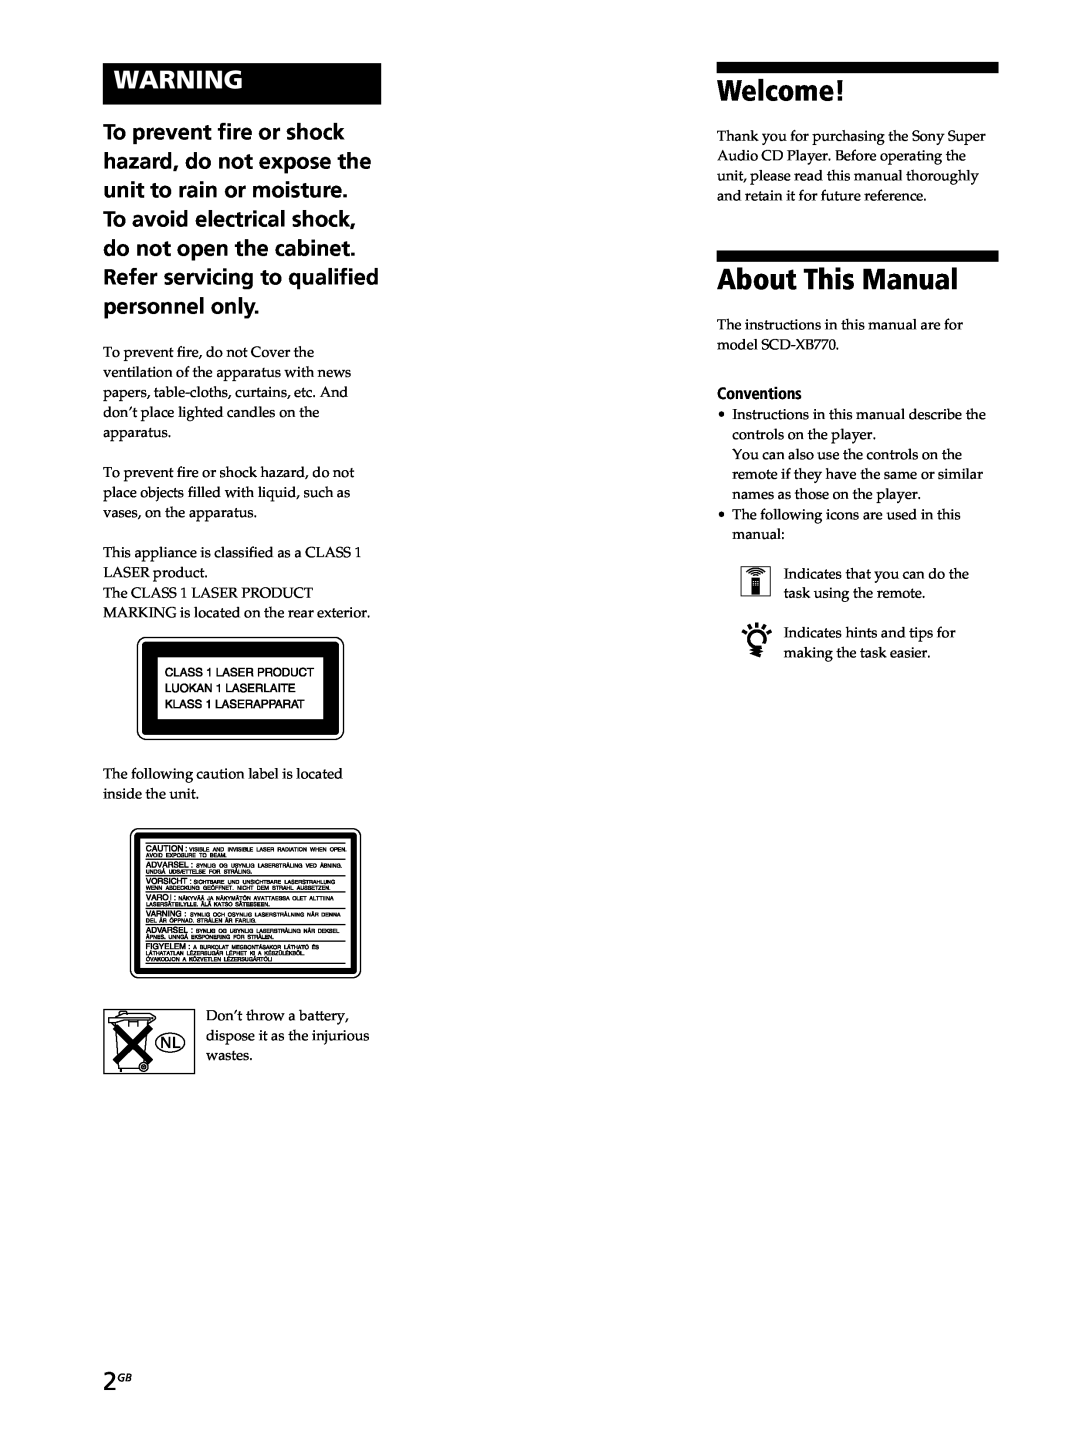 Sony SCD-XB770 operating instructions Welcome, About This Manual, Conventions 